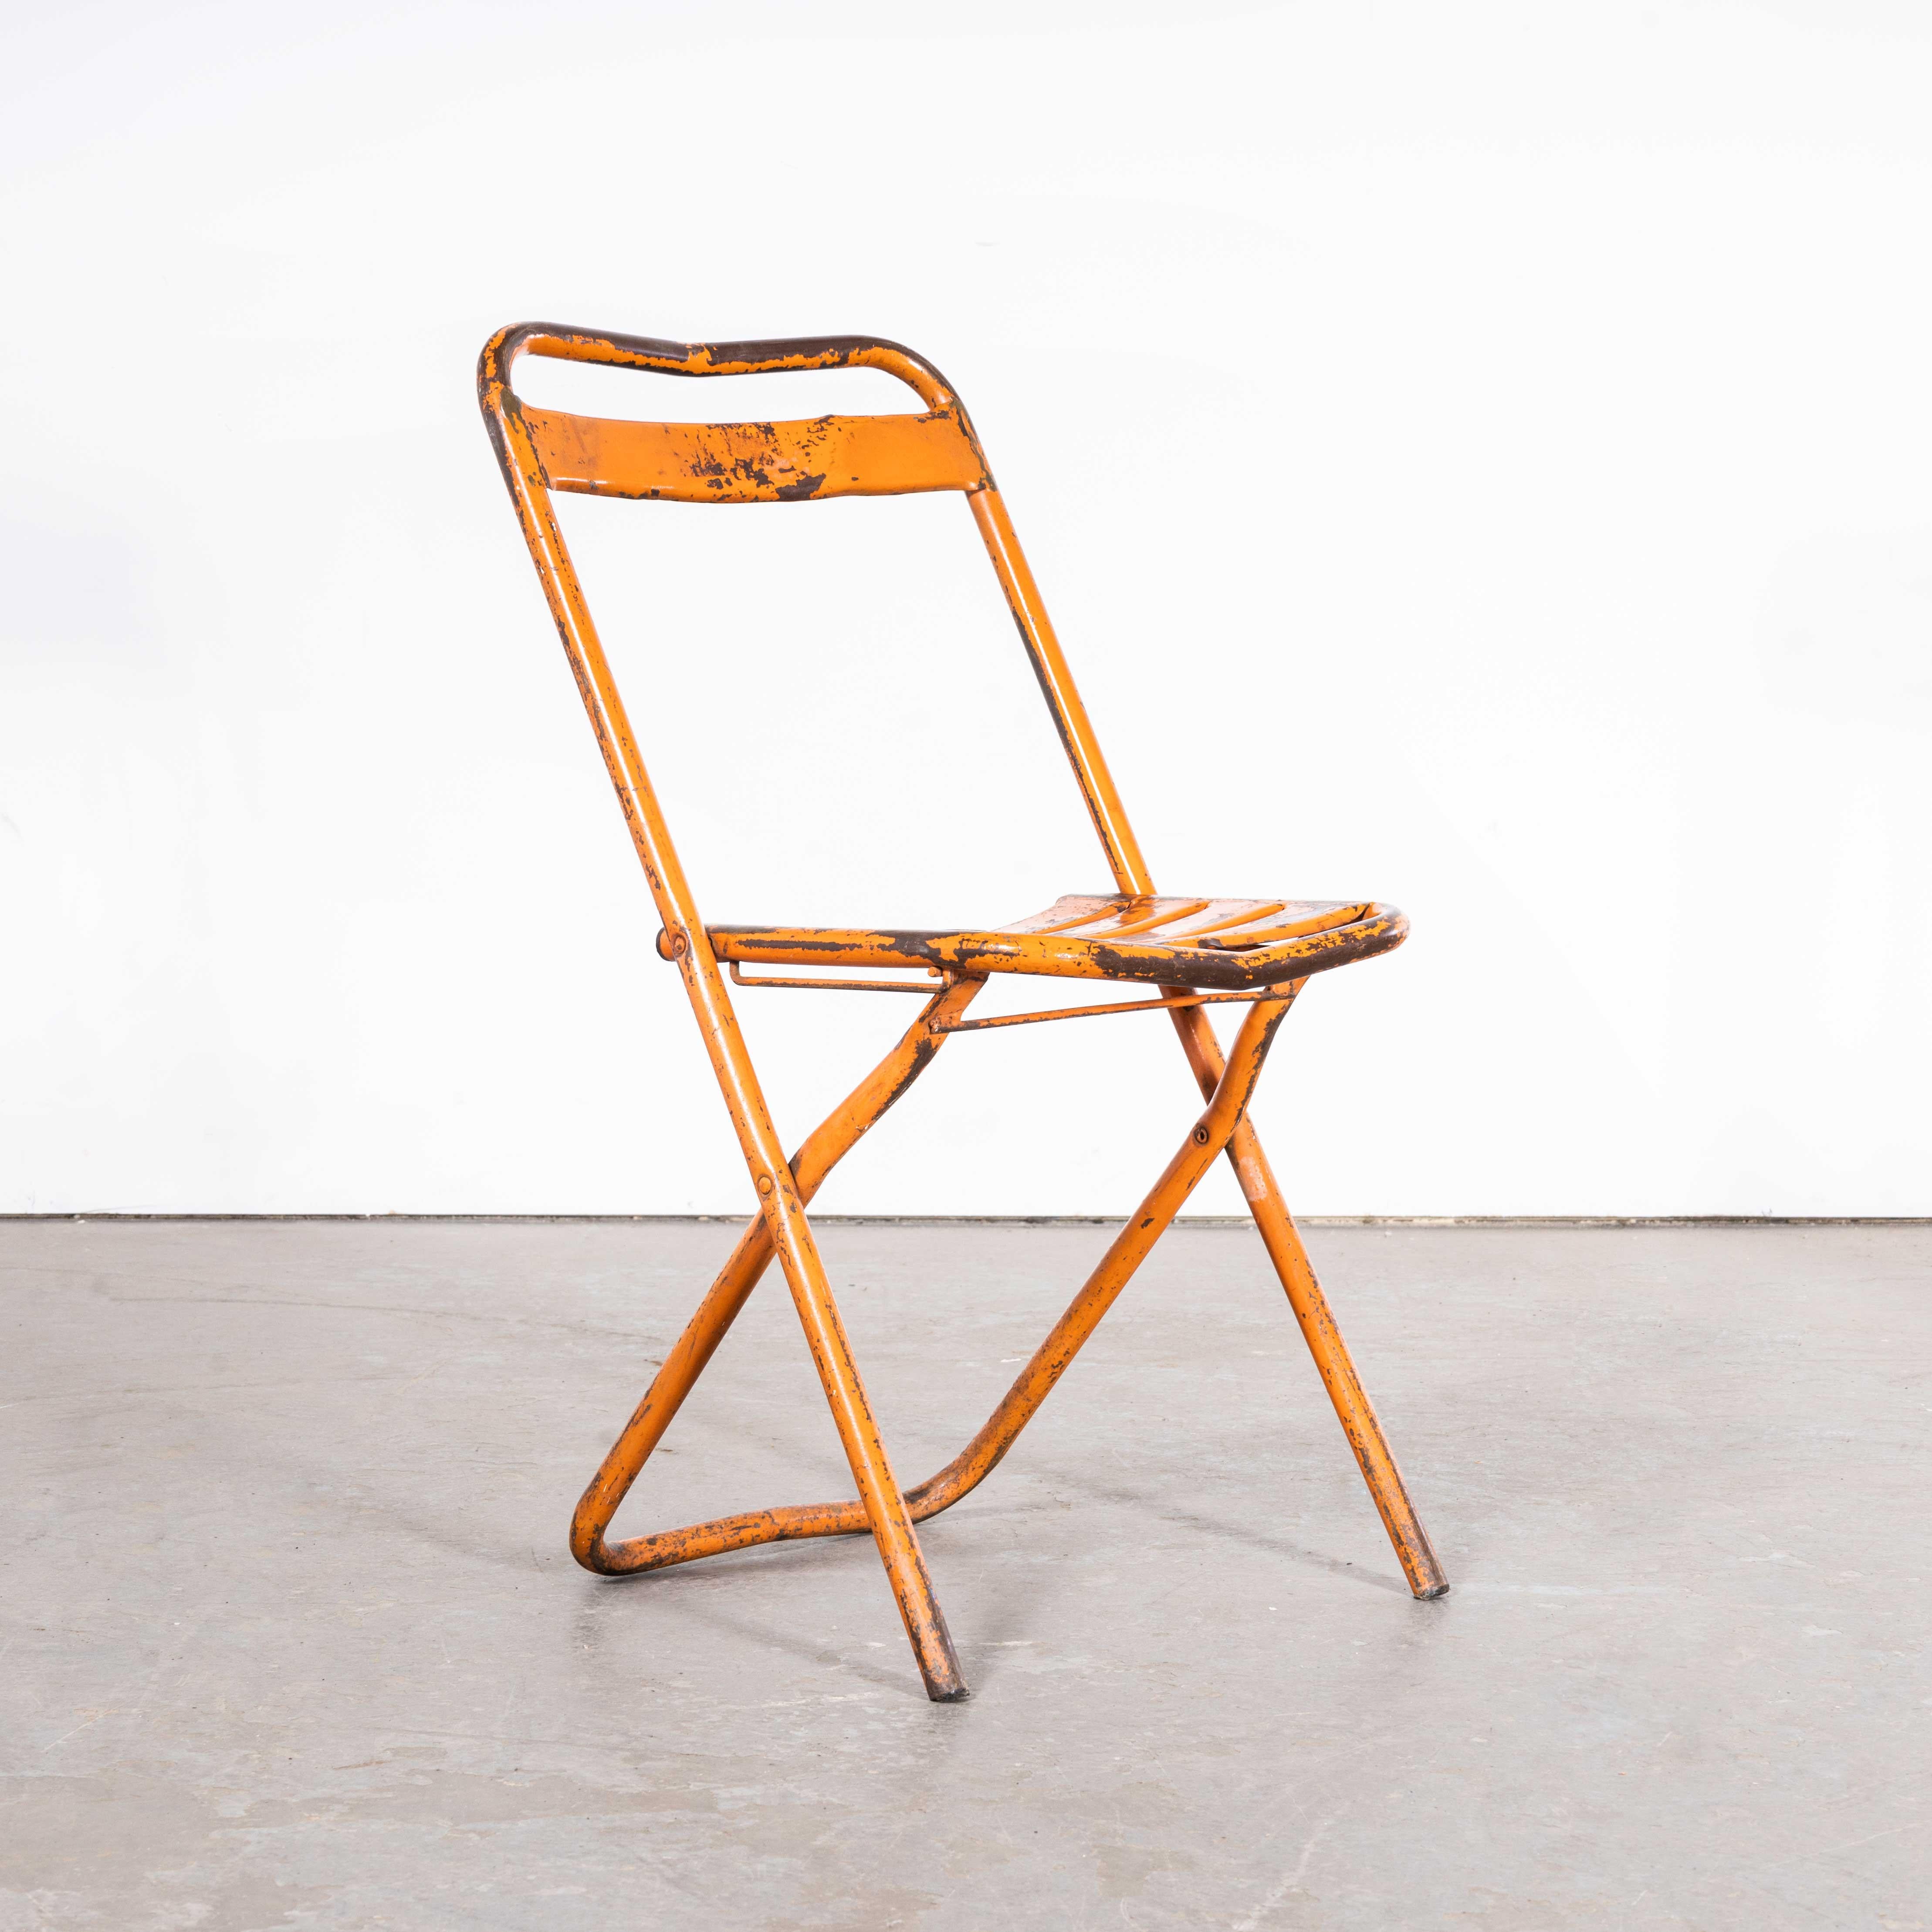 1950’s Original Orange Tolix Folding Metal Outdoor Chairs – Set Of Four
1950’s Original Orange Tolix Folding Metal Outdoor Chairs – Set Of Four. Tolix is one of our all time favourite companies. In 1907 Frenchman Xavier Pauchard discovered that he